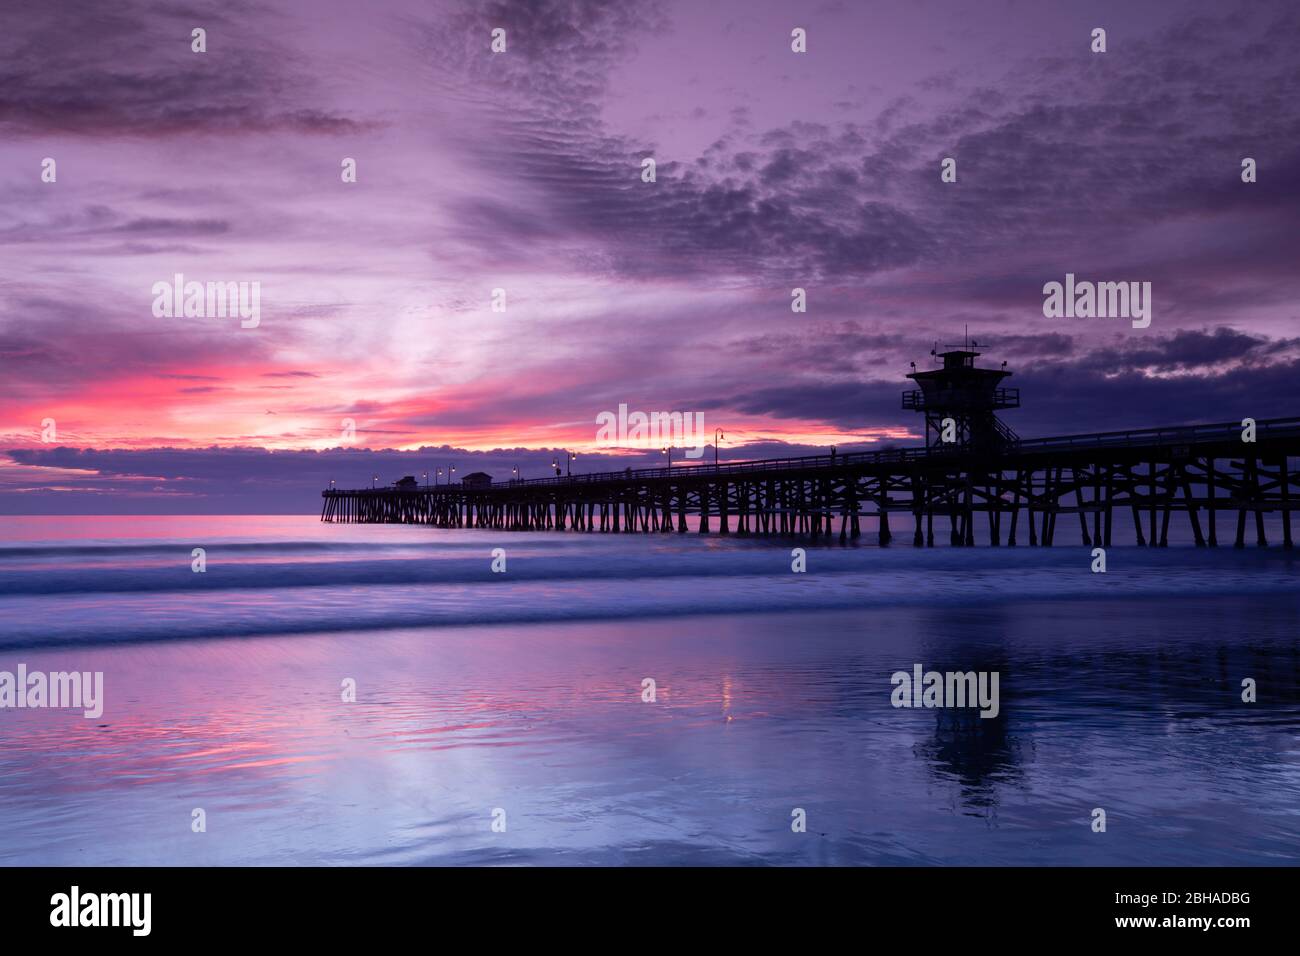 Silhouette of pier at sunset, San Clemente, California, USA Stock Photo